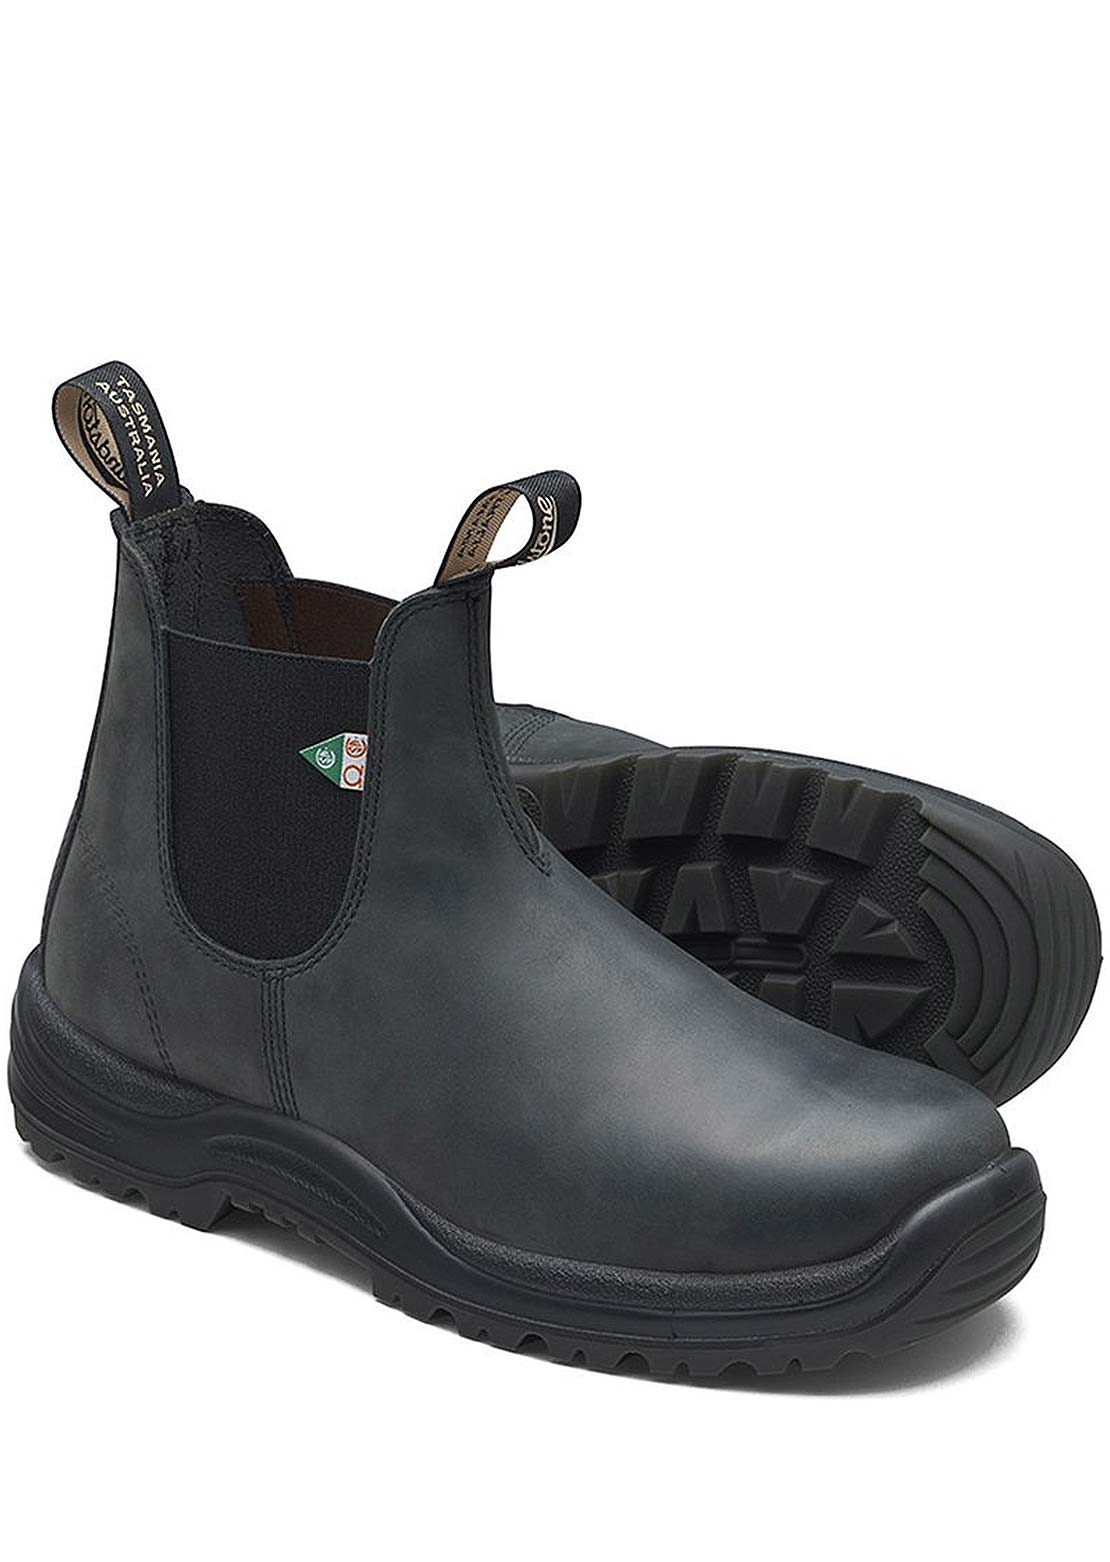 Blundstone 181 Work &amp; Safety Boots Waxy Rustic Black